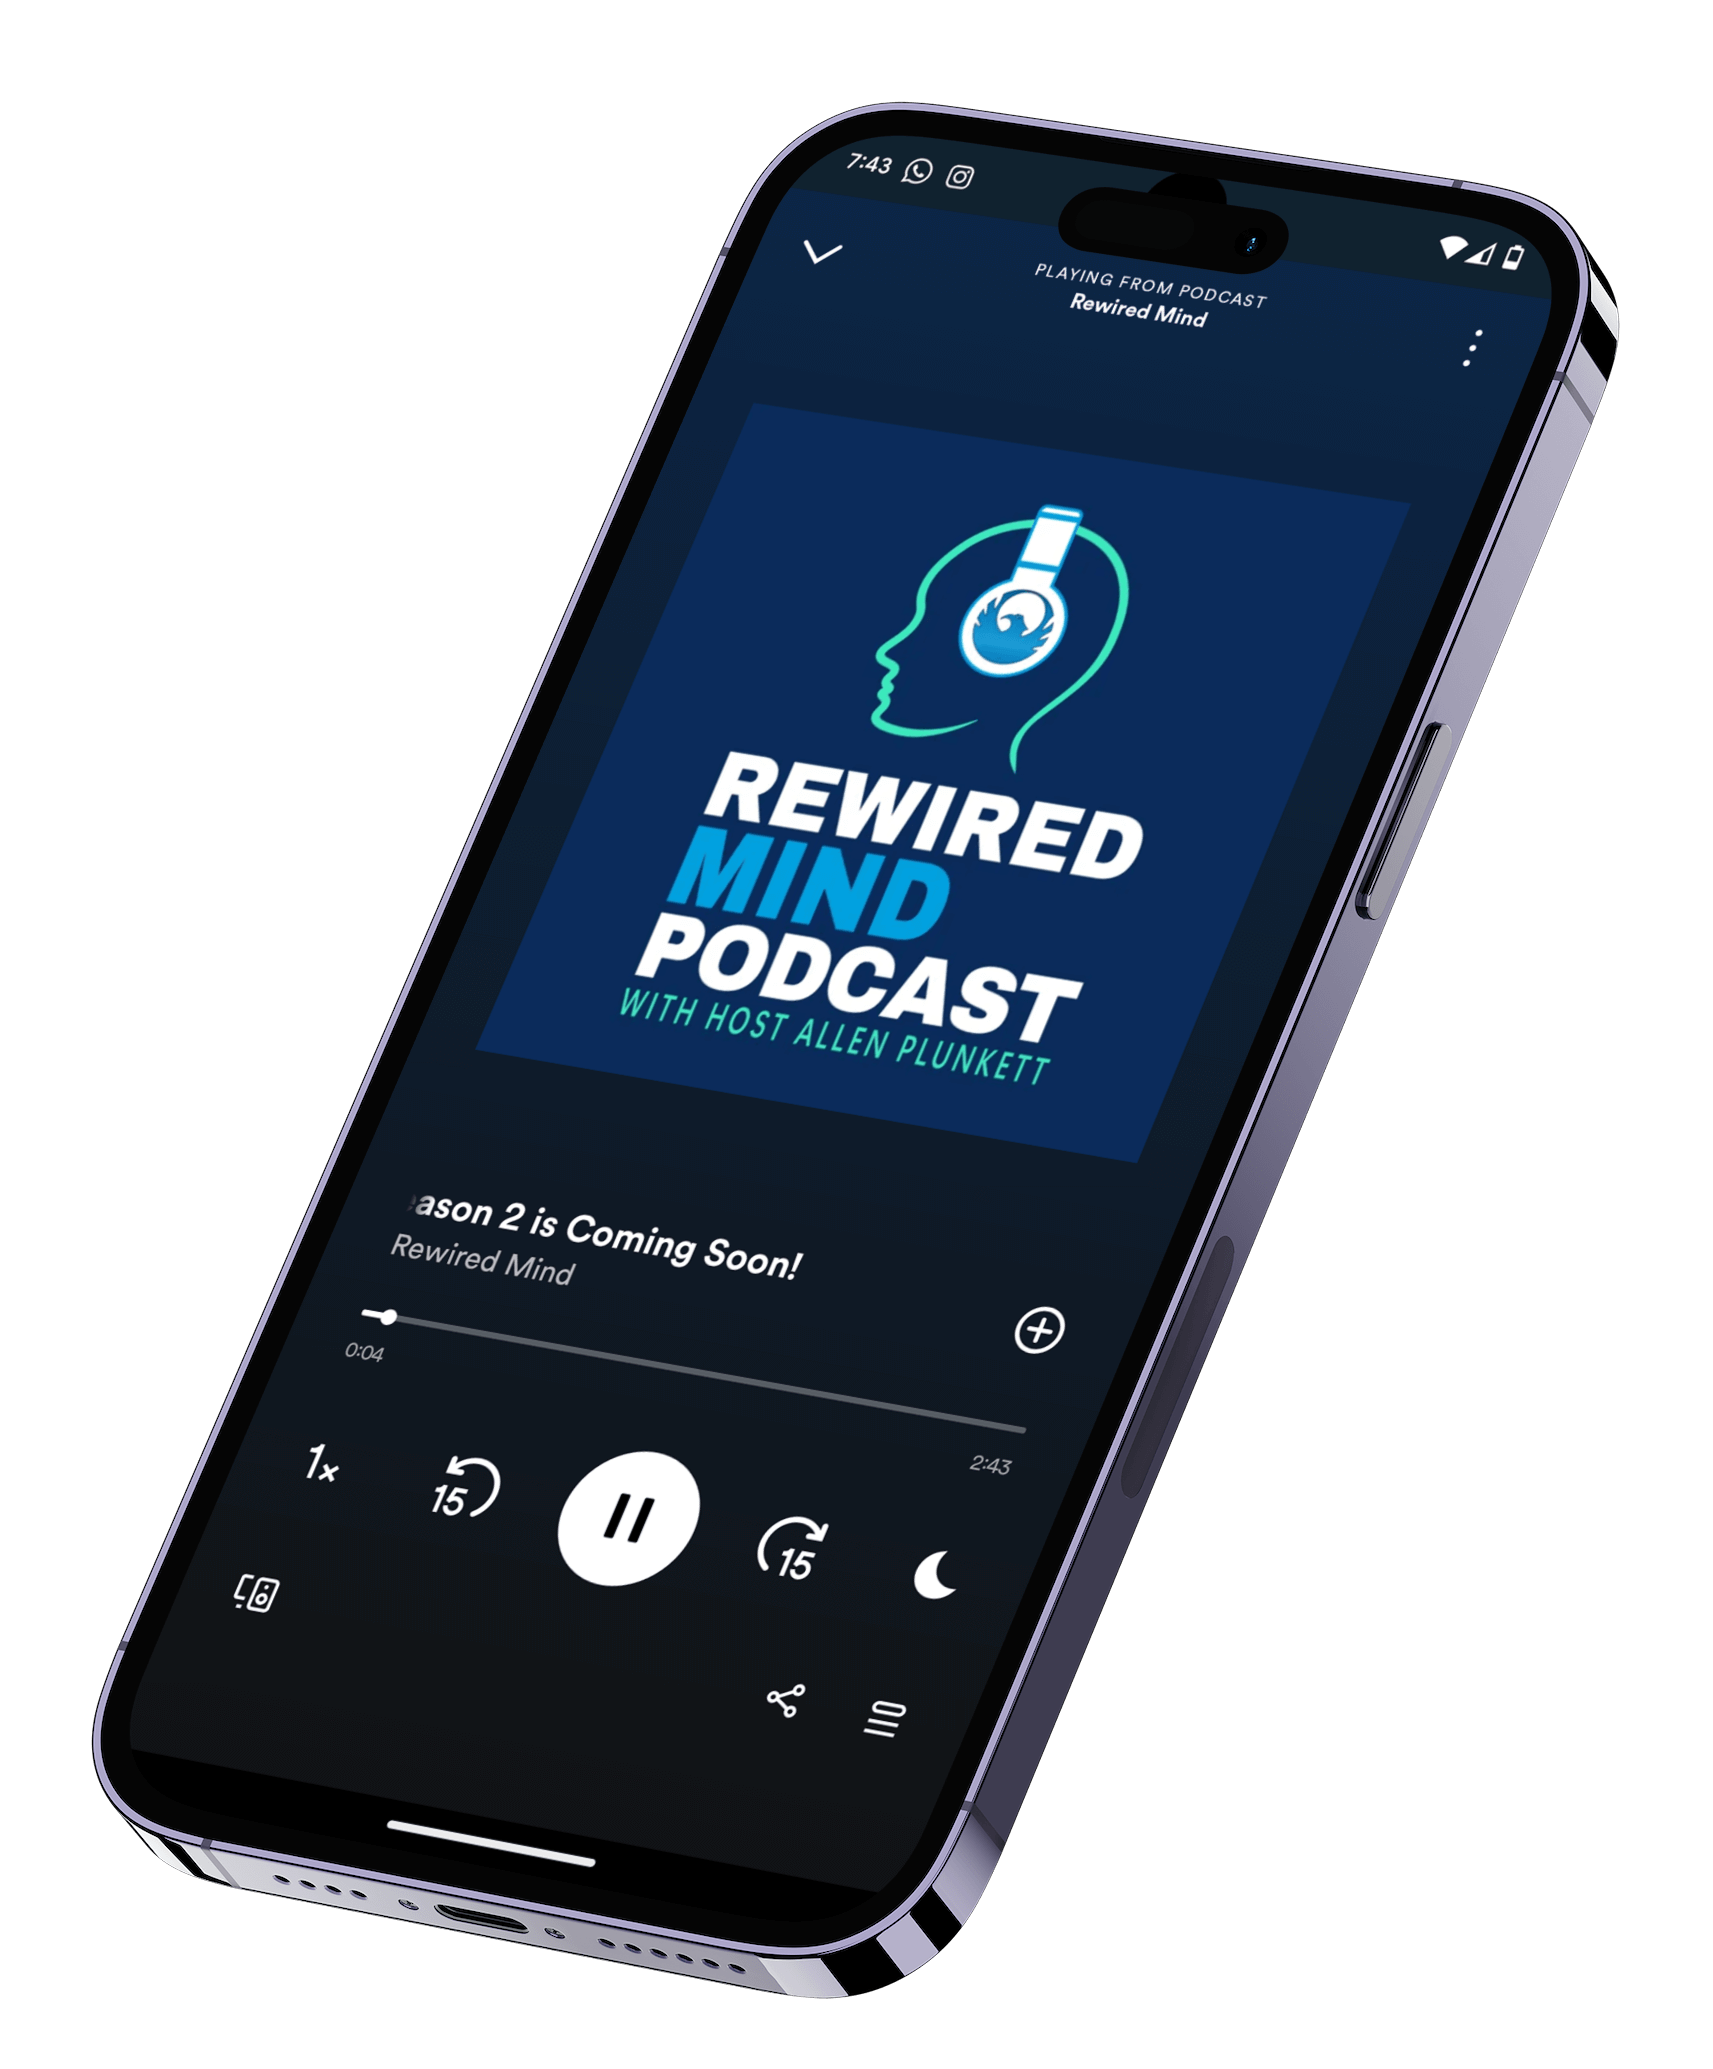 Rewired Mind podcast logo on an iphone.